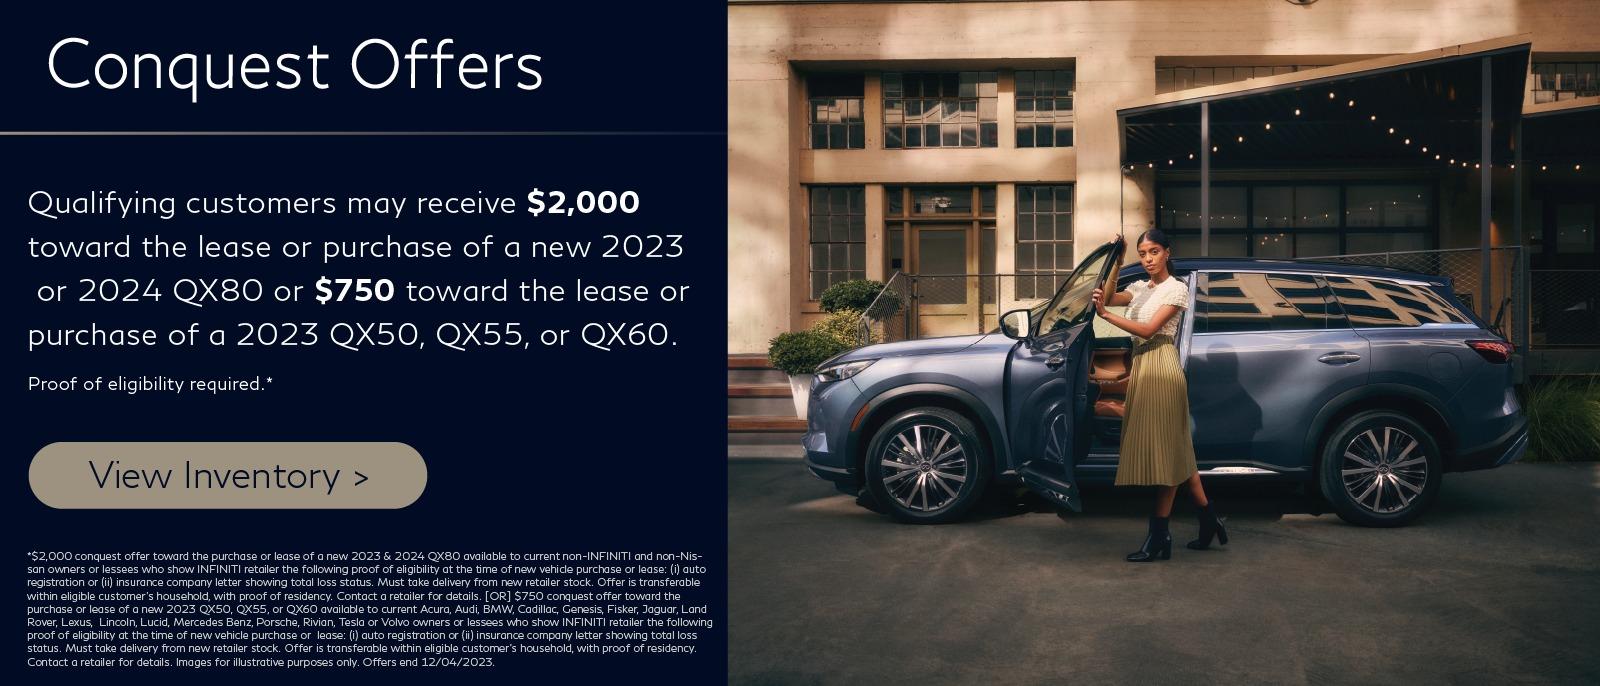 Conquest Offers
Qualifying customers may receive $2,000 towards the lease or purchase of a new 2023 QX80 or $750 towards the lease or purchase of a 2023 QX50, QX55 or QX60.
Proof of eligibility required.**